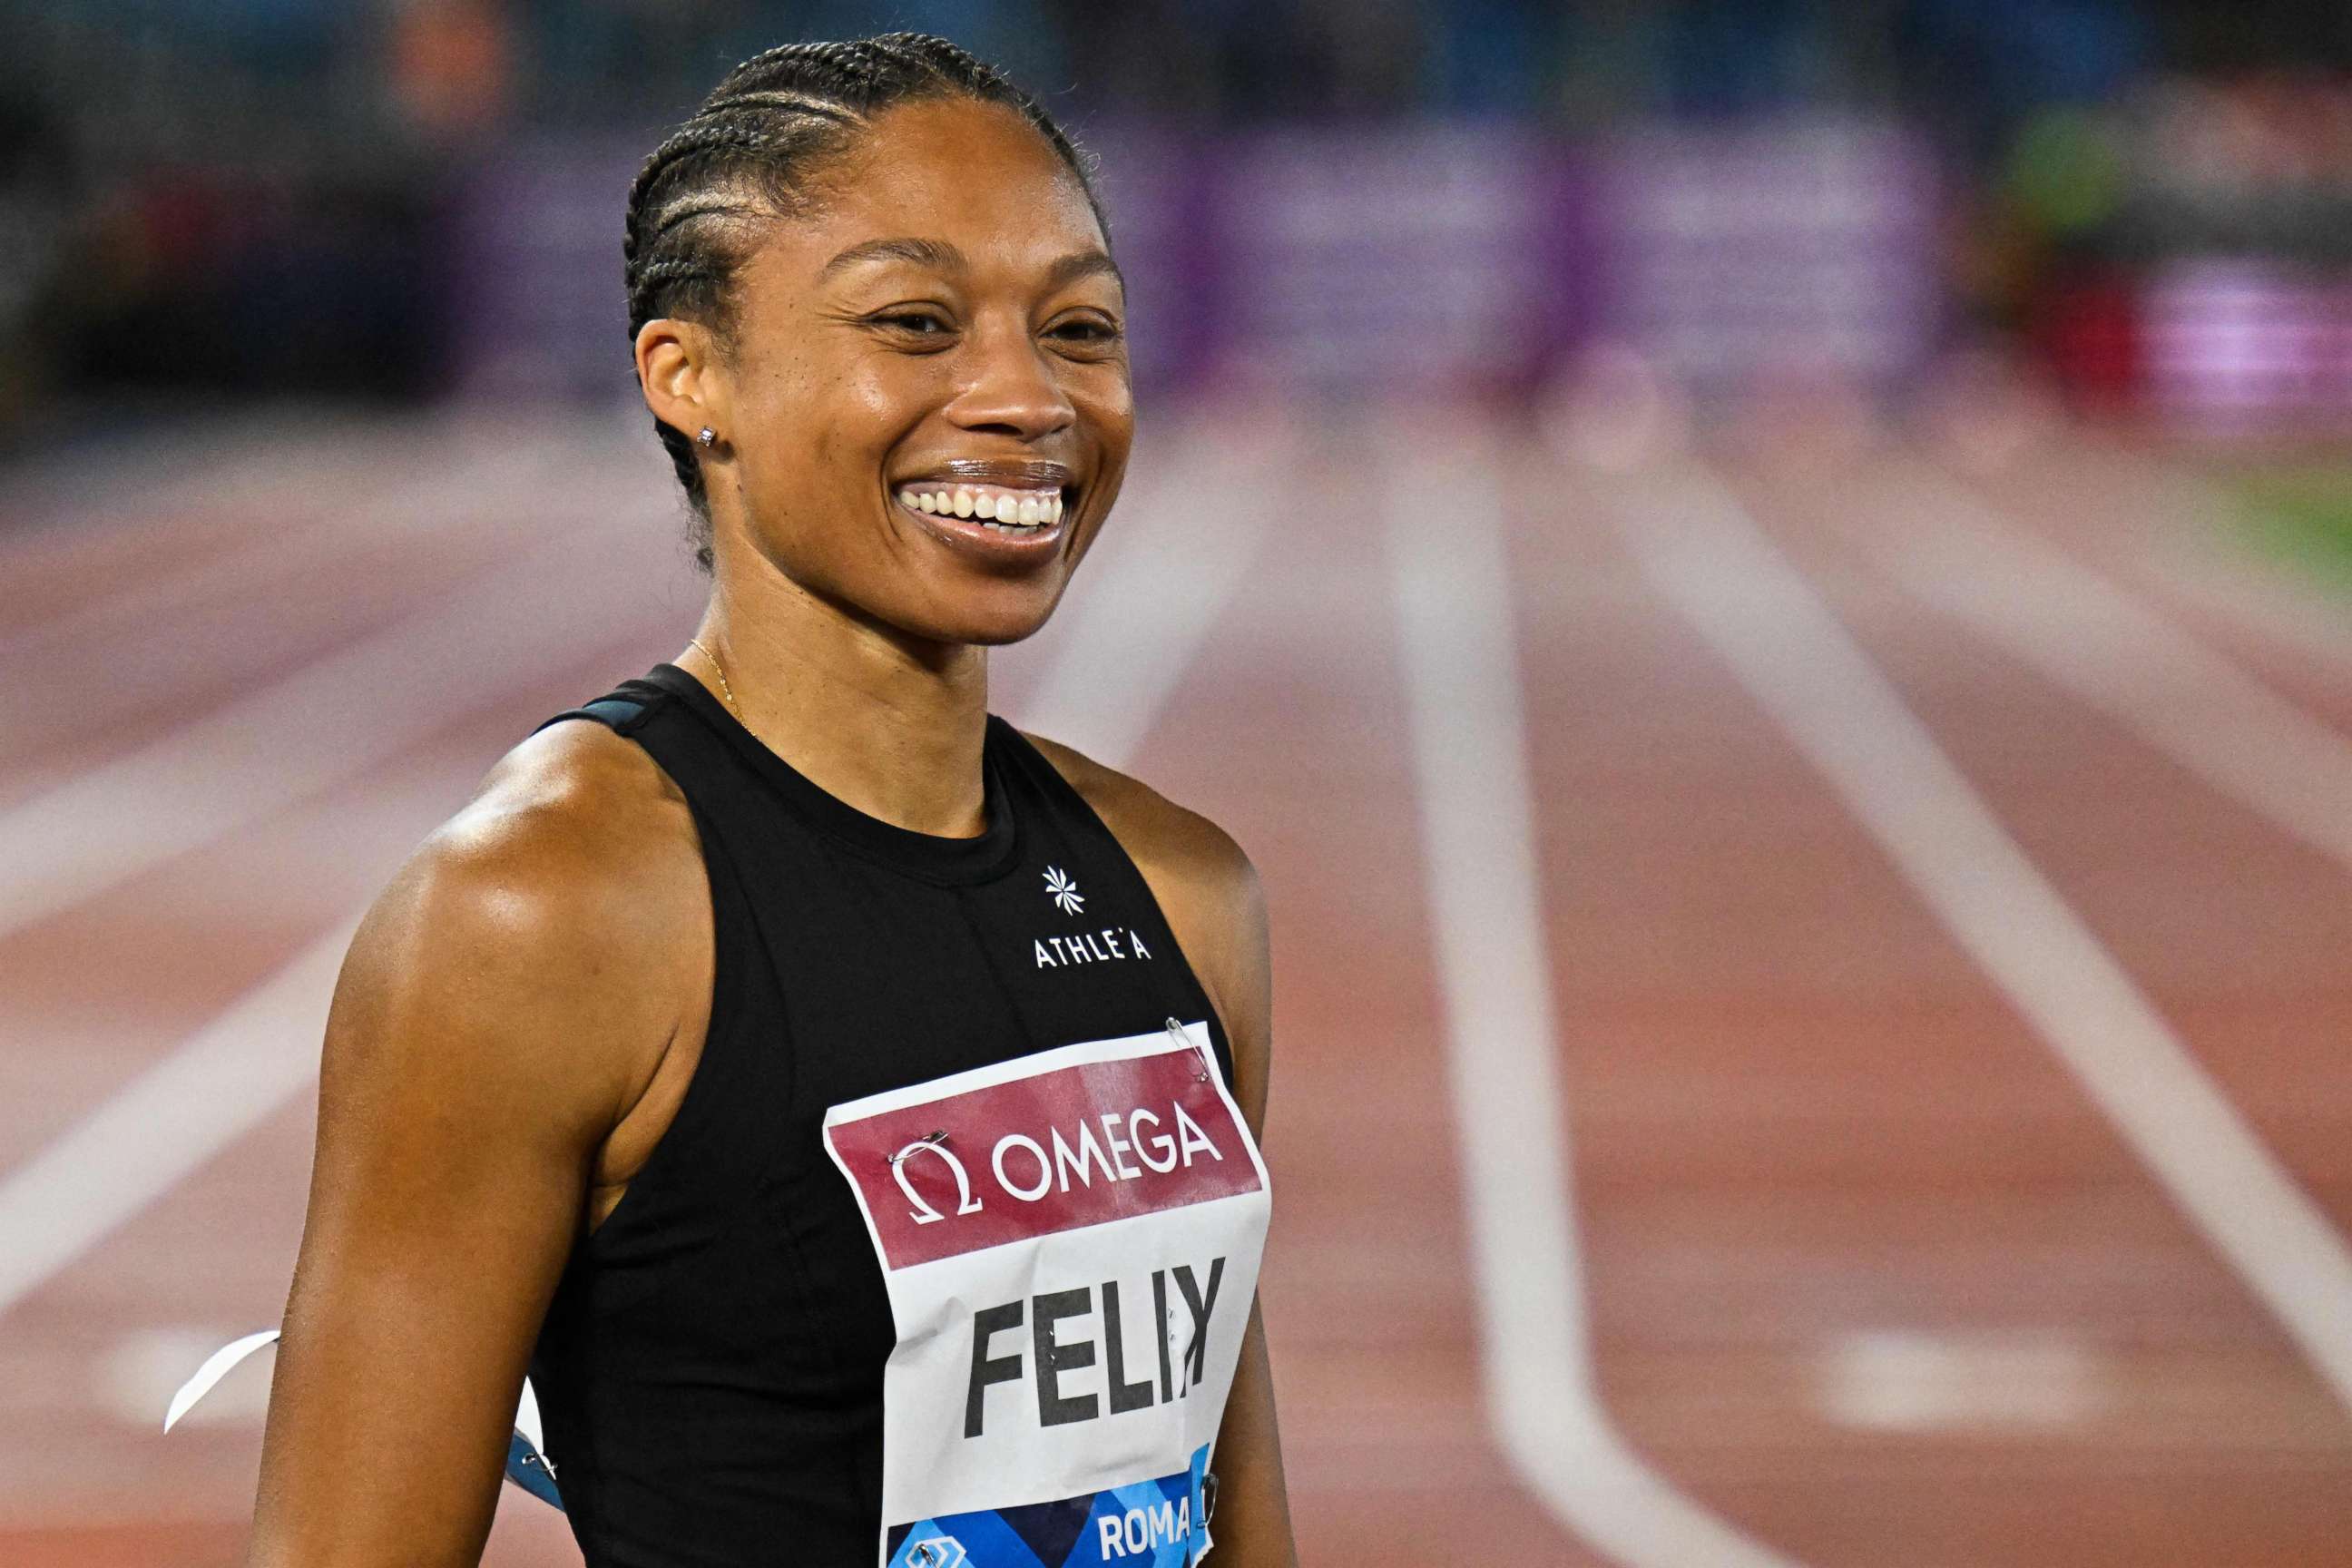 PHOTO: Allyson Felix reacts after placing 7th of the Women's 200m event, June 9, 2022, during the Wanda Diamond League athletics meeting at the Olympic Stadium in Rome.